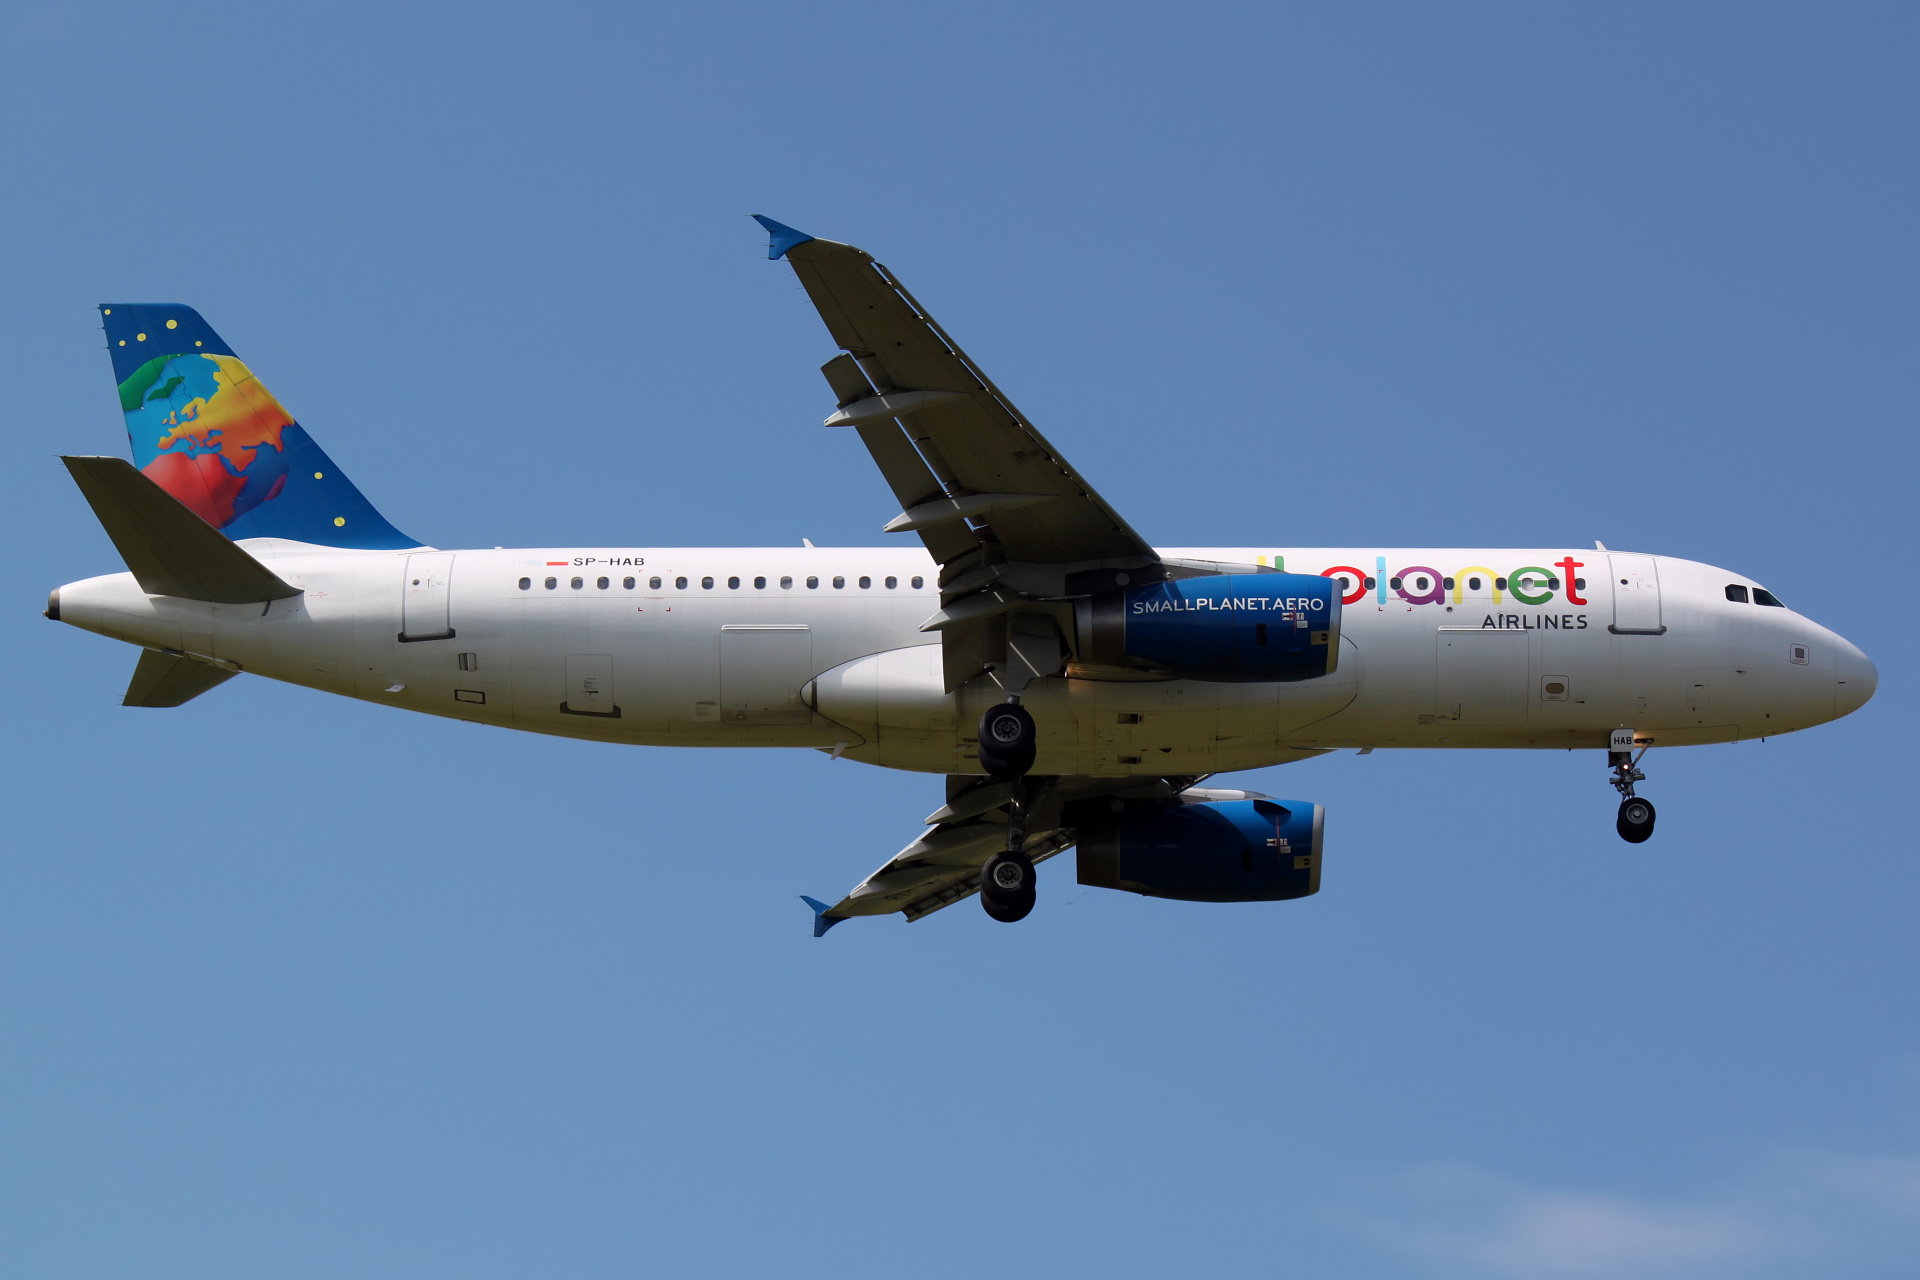 SP-HAB (Samoloty » Spotting na EPWA » Airbus A320-200 » Small Planet Airlines)